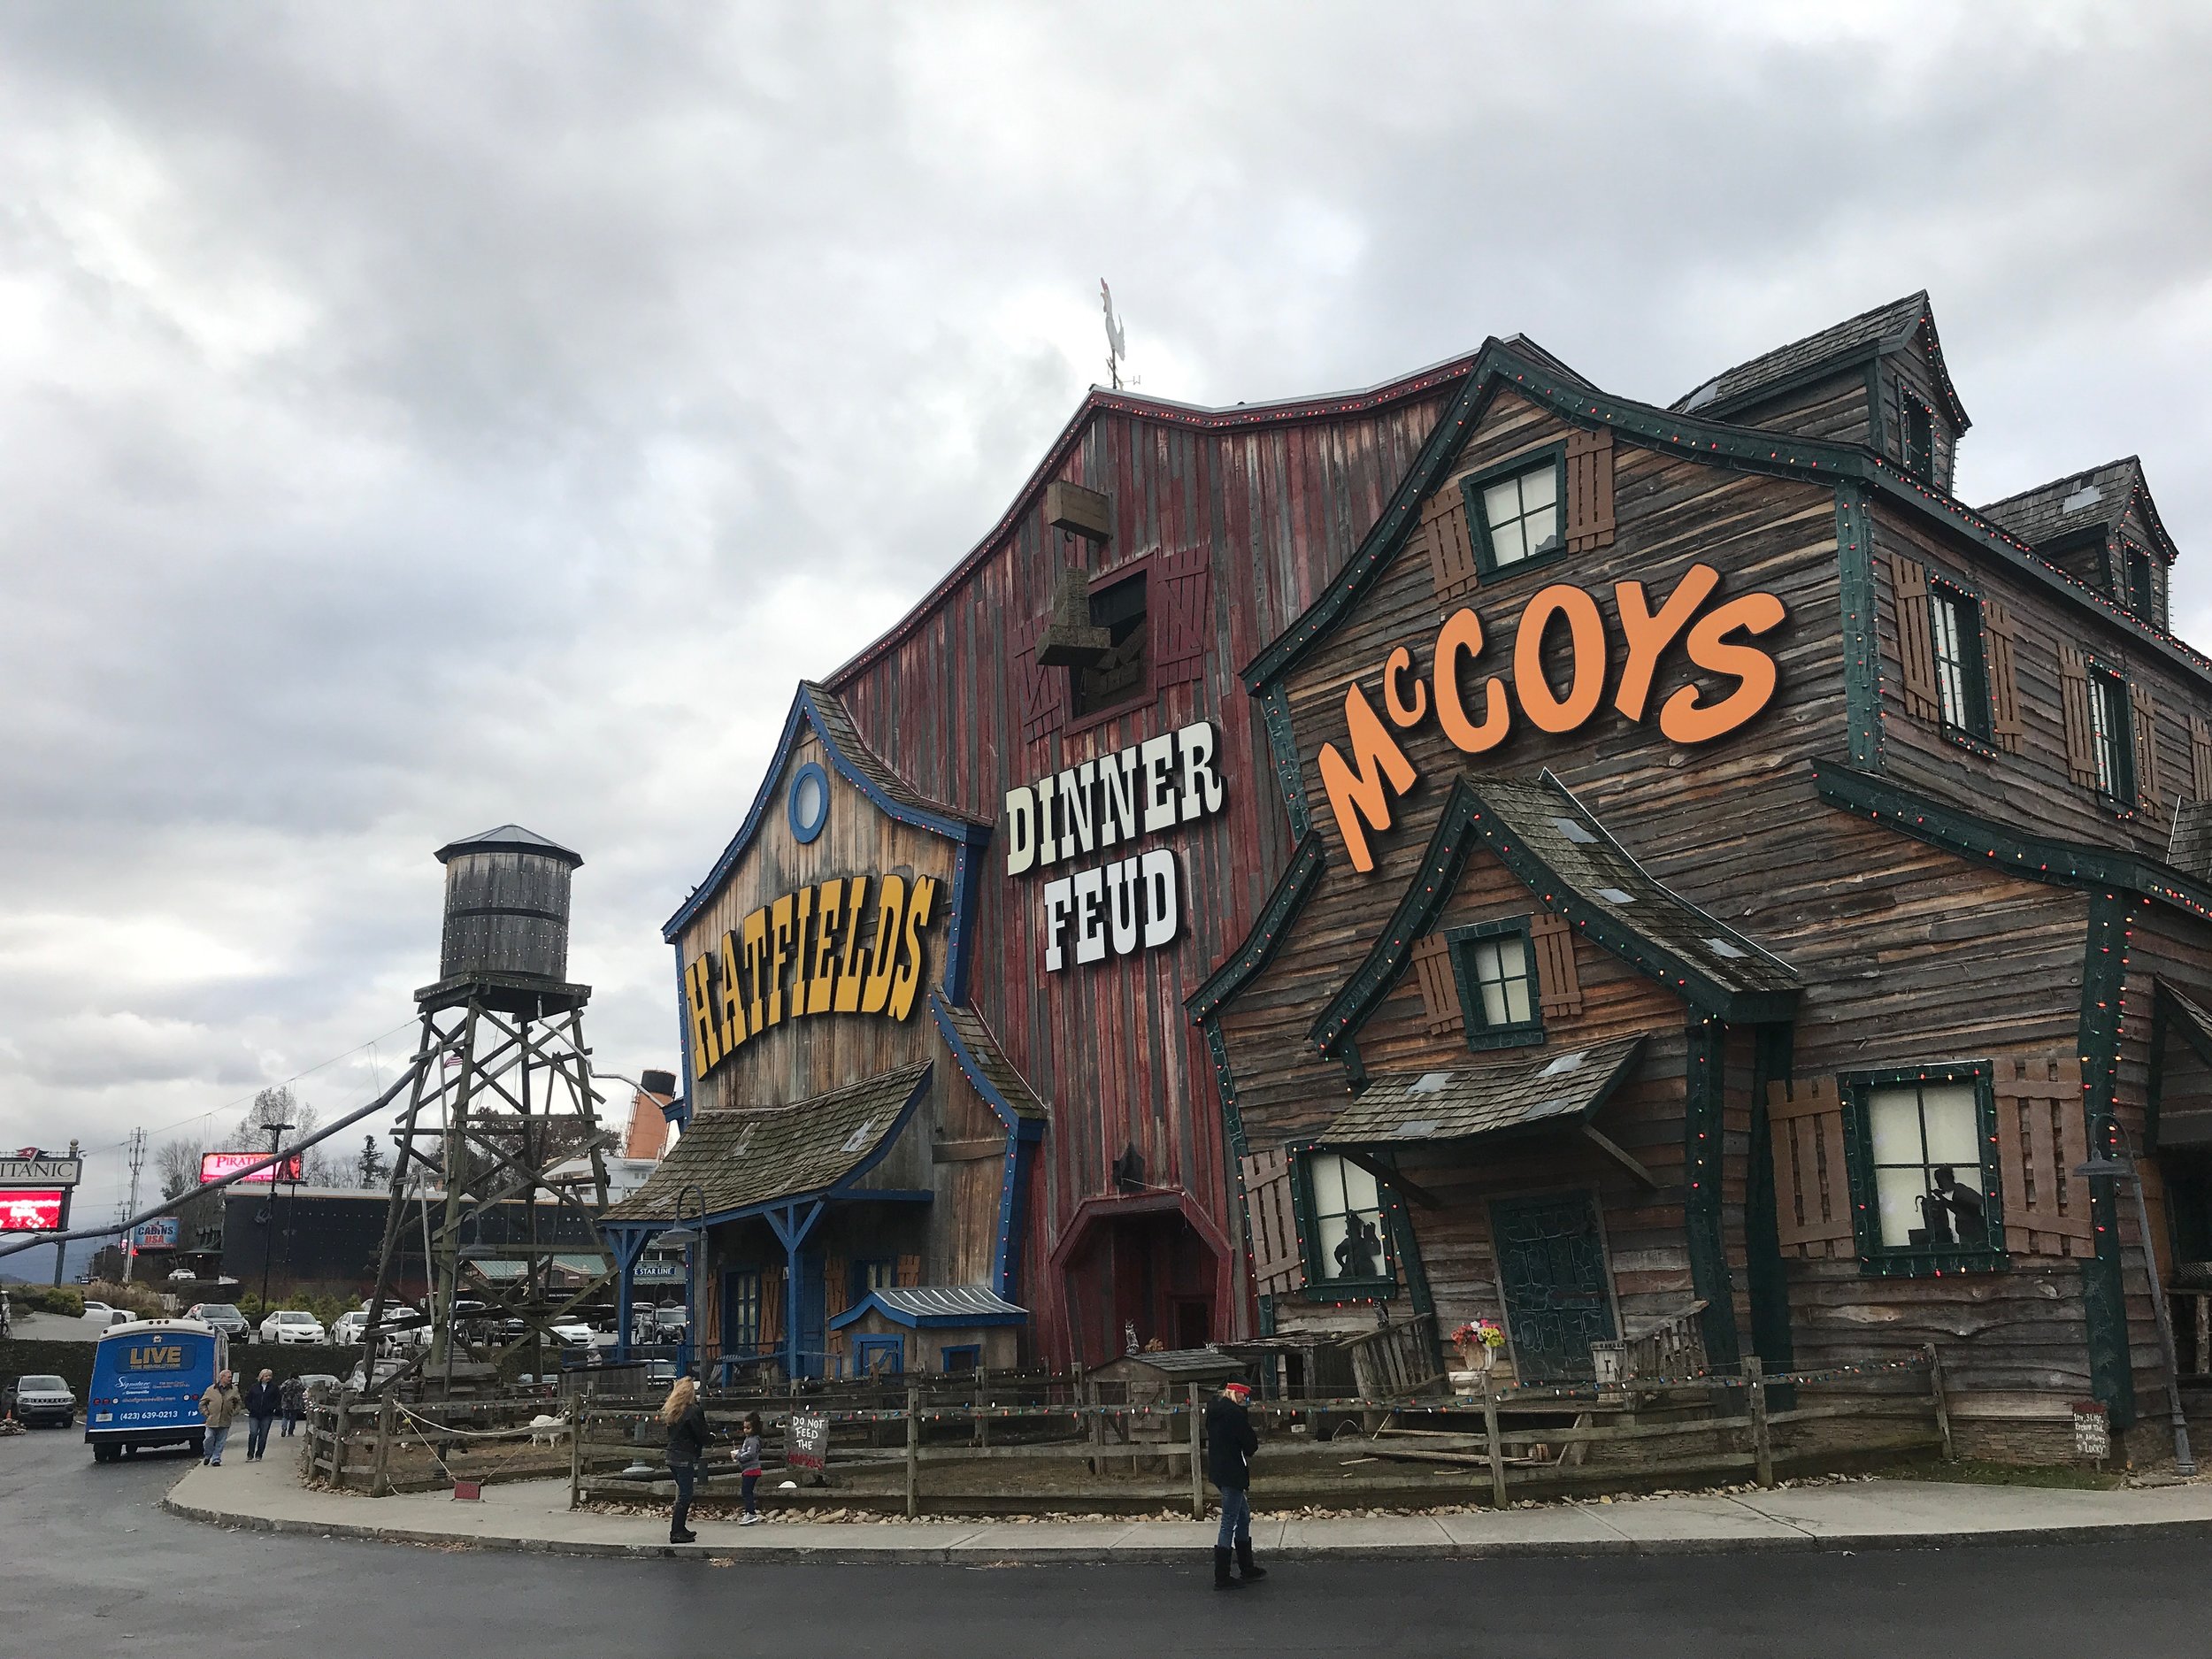  A dinner theater in Pigeon Forge, Tenn., where a family dispute that left dozens killed is portrayed as slapstick comedy.      